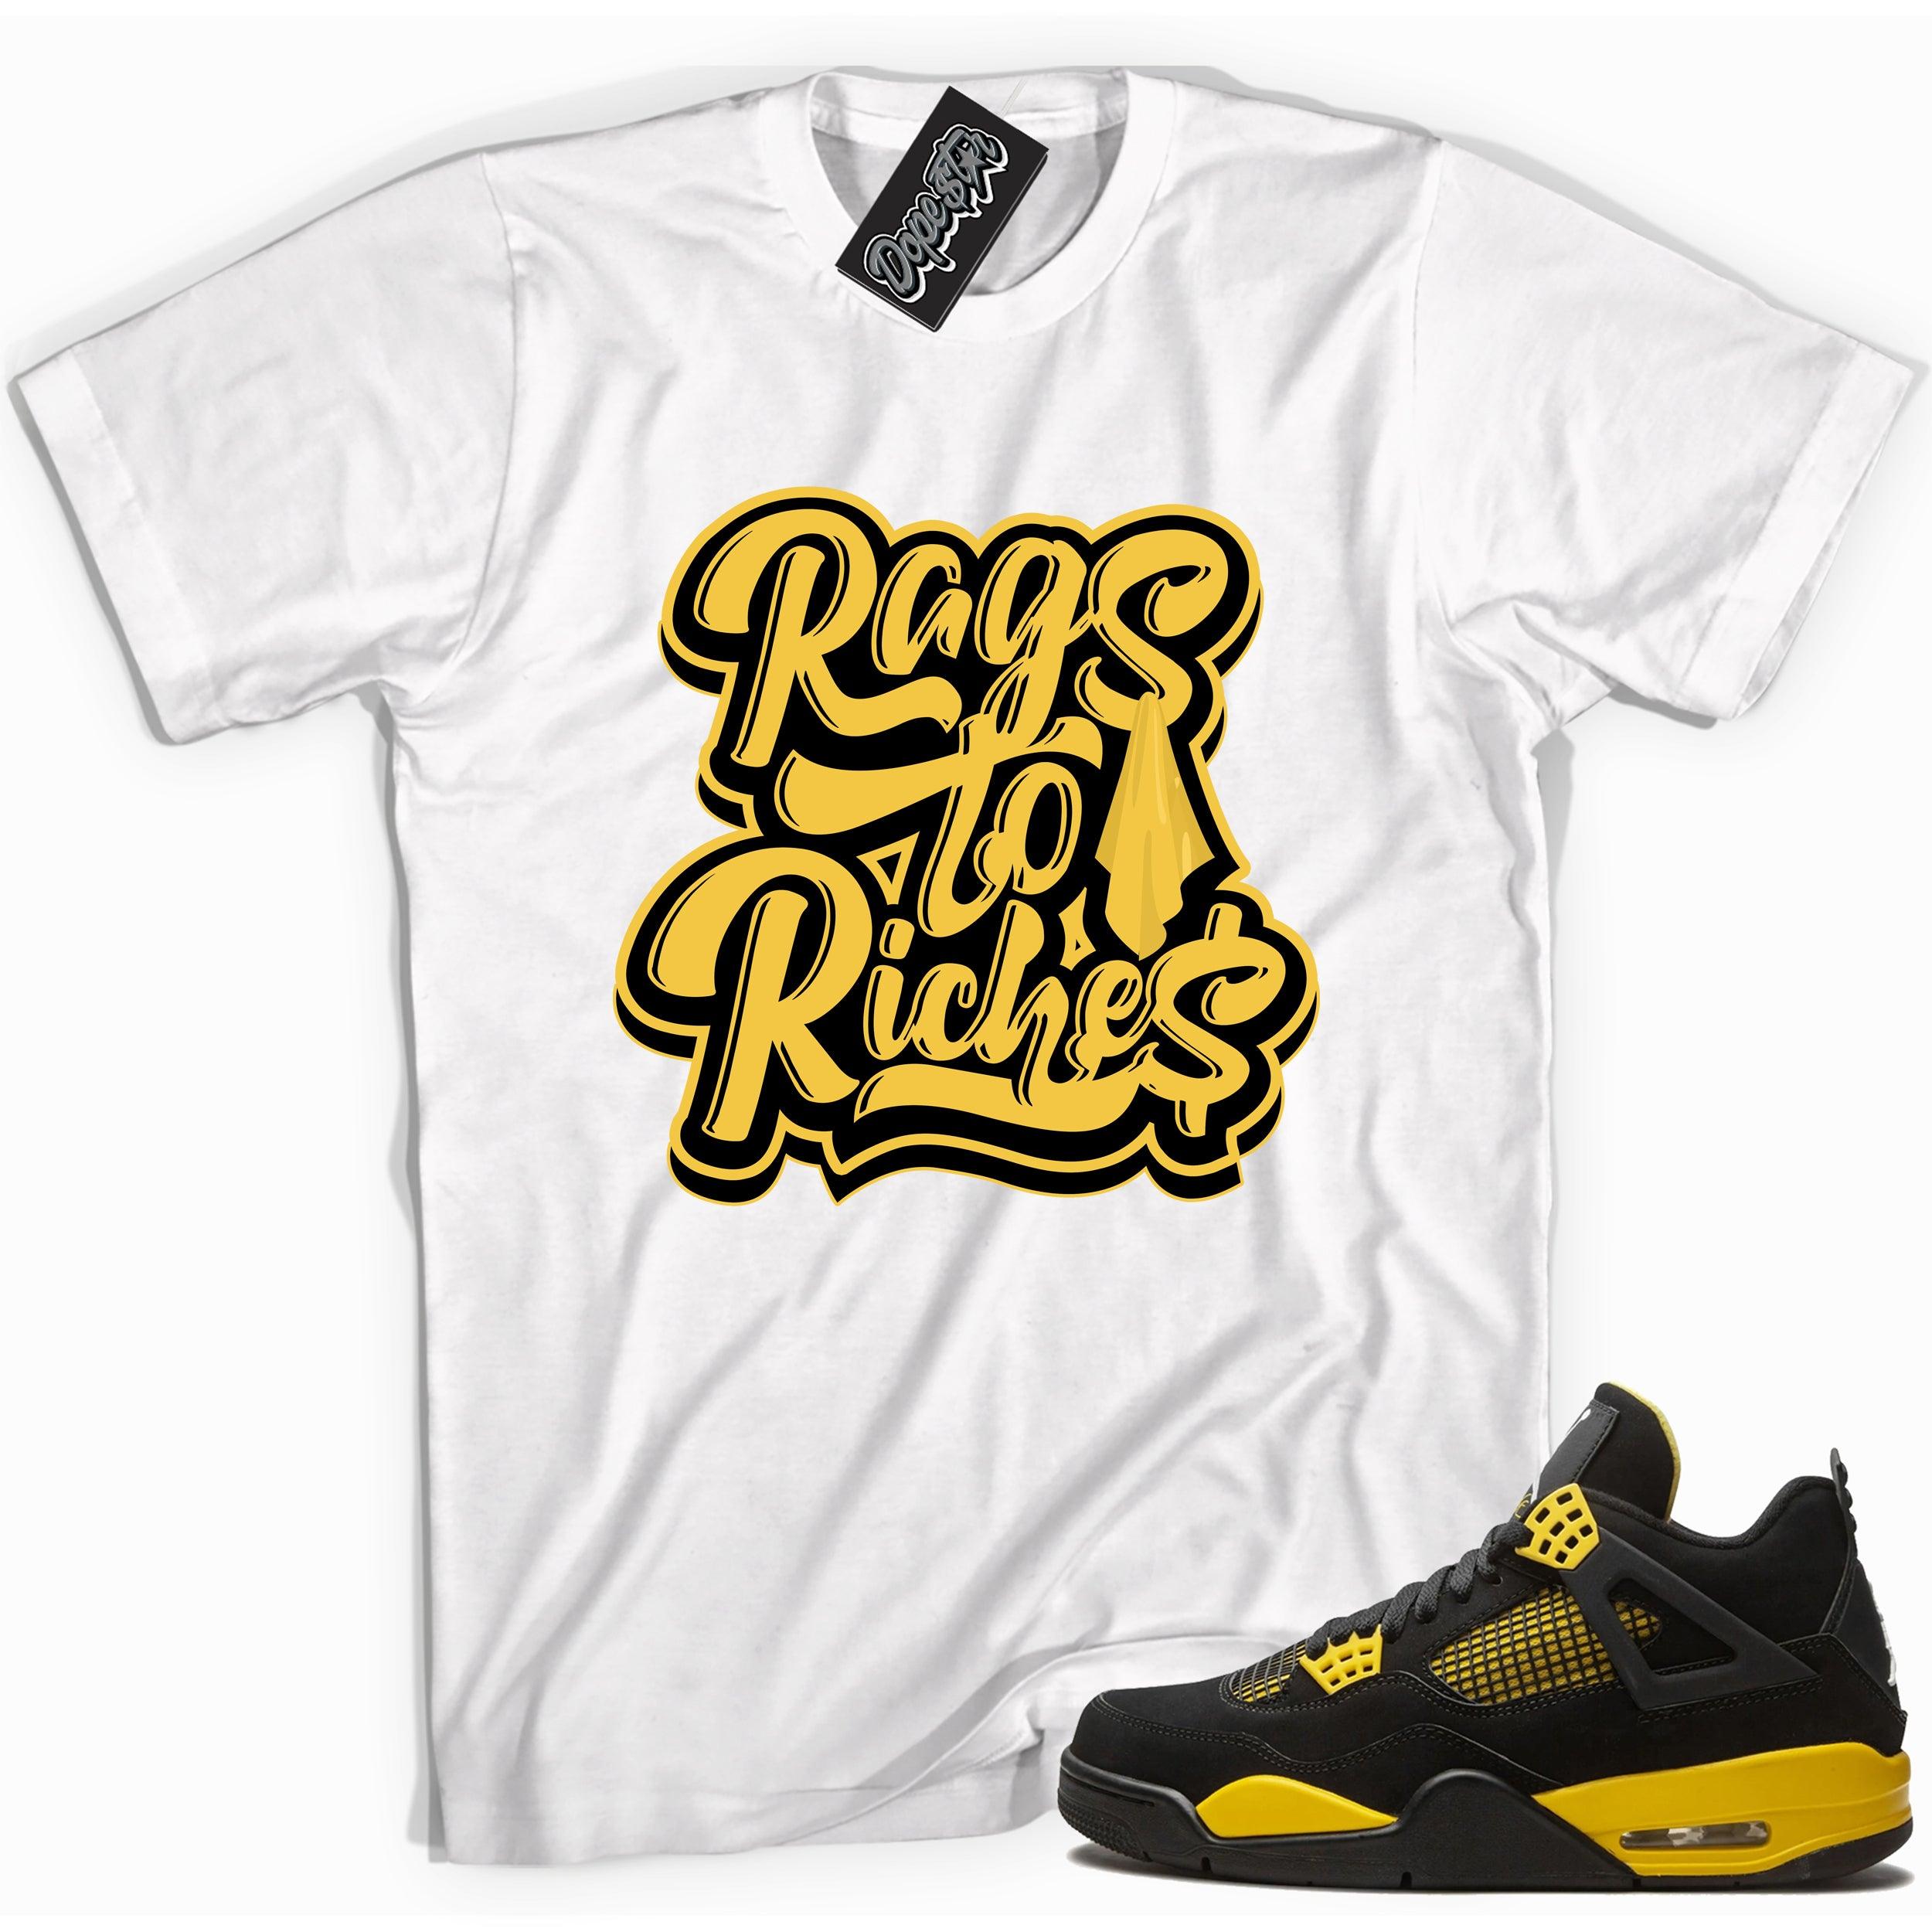 Cool white  graphic tee with 'rags to riches' print, that perfectly matches Air Jordan 4 Thunder sneakers